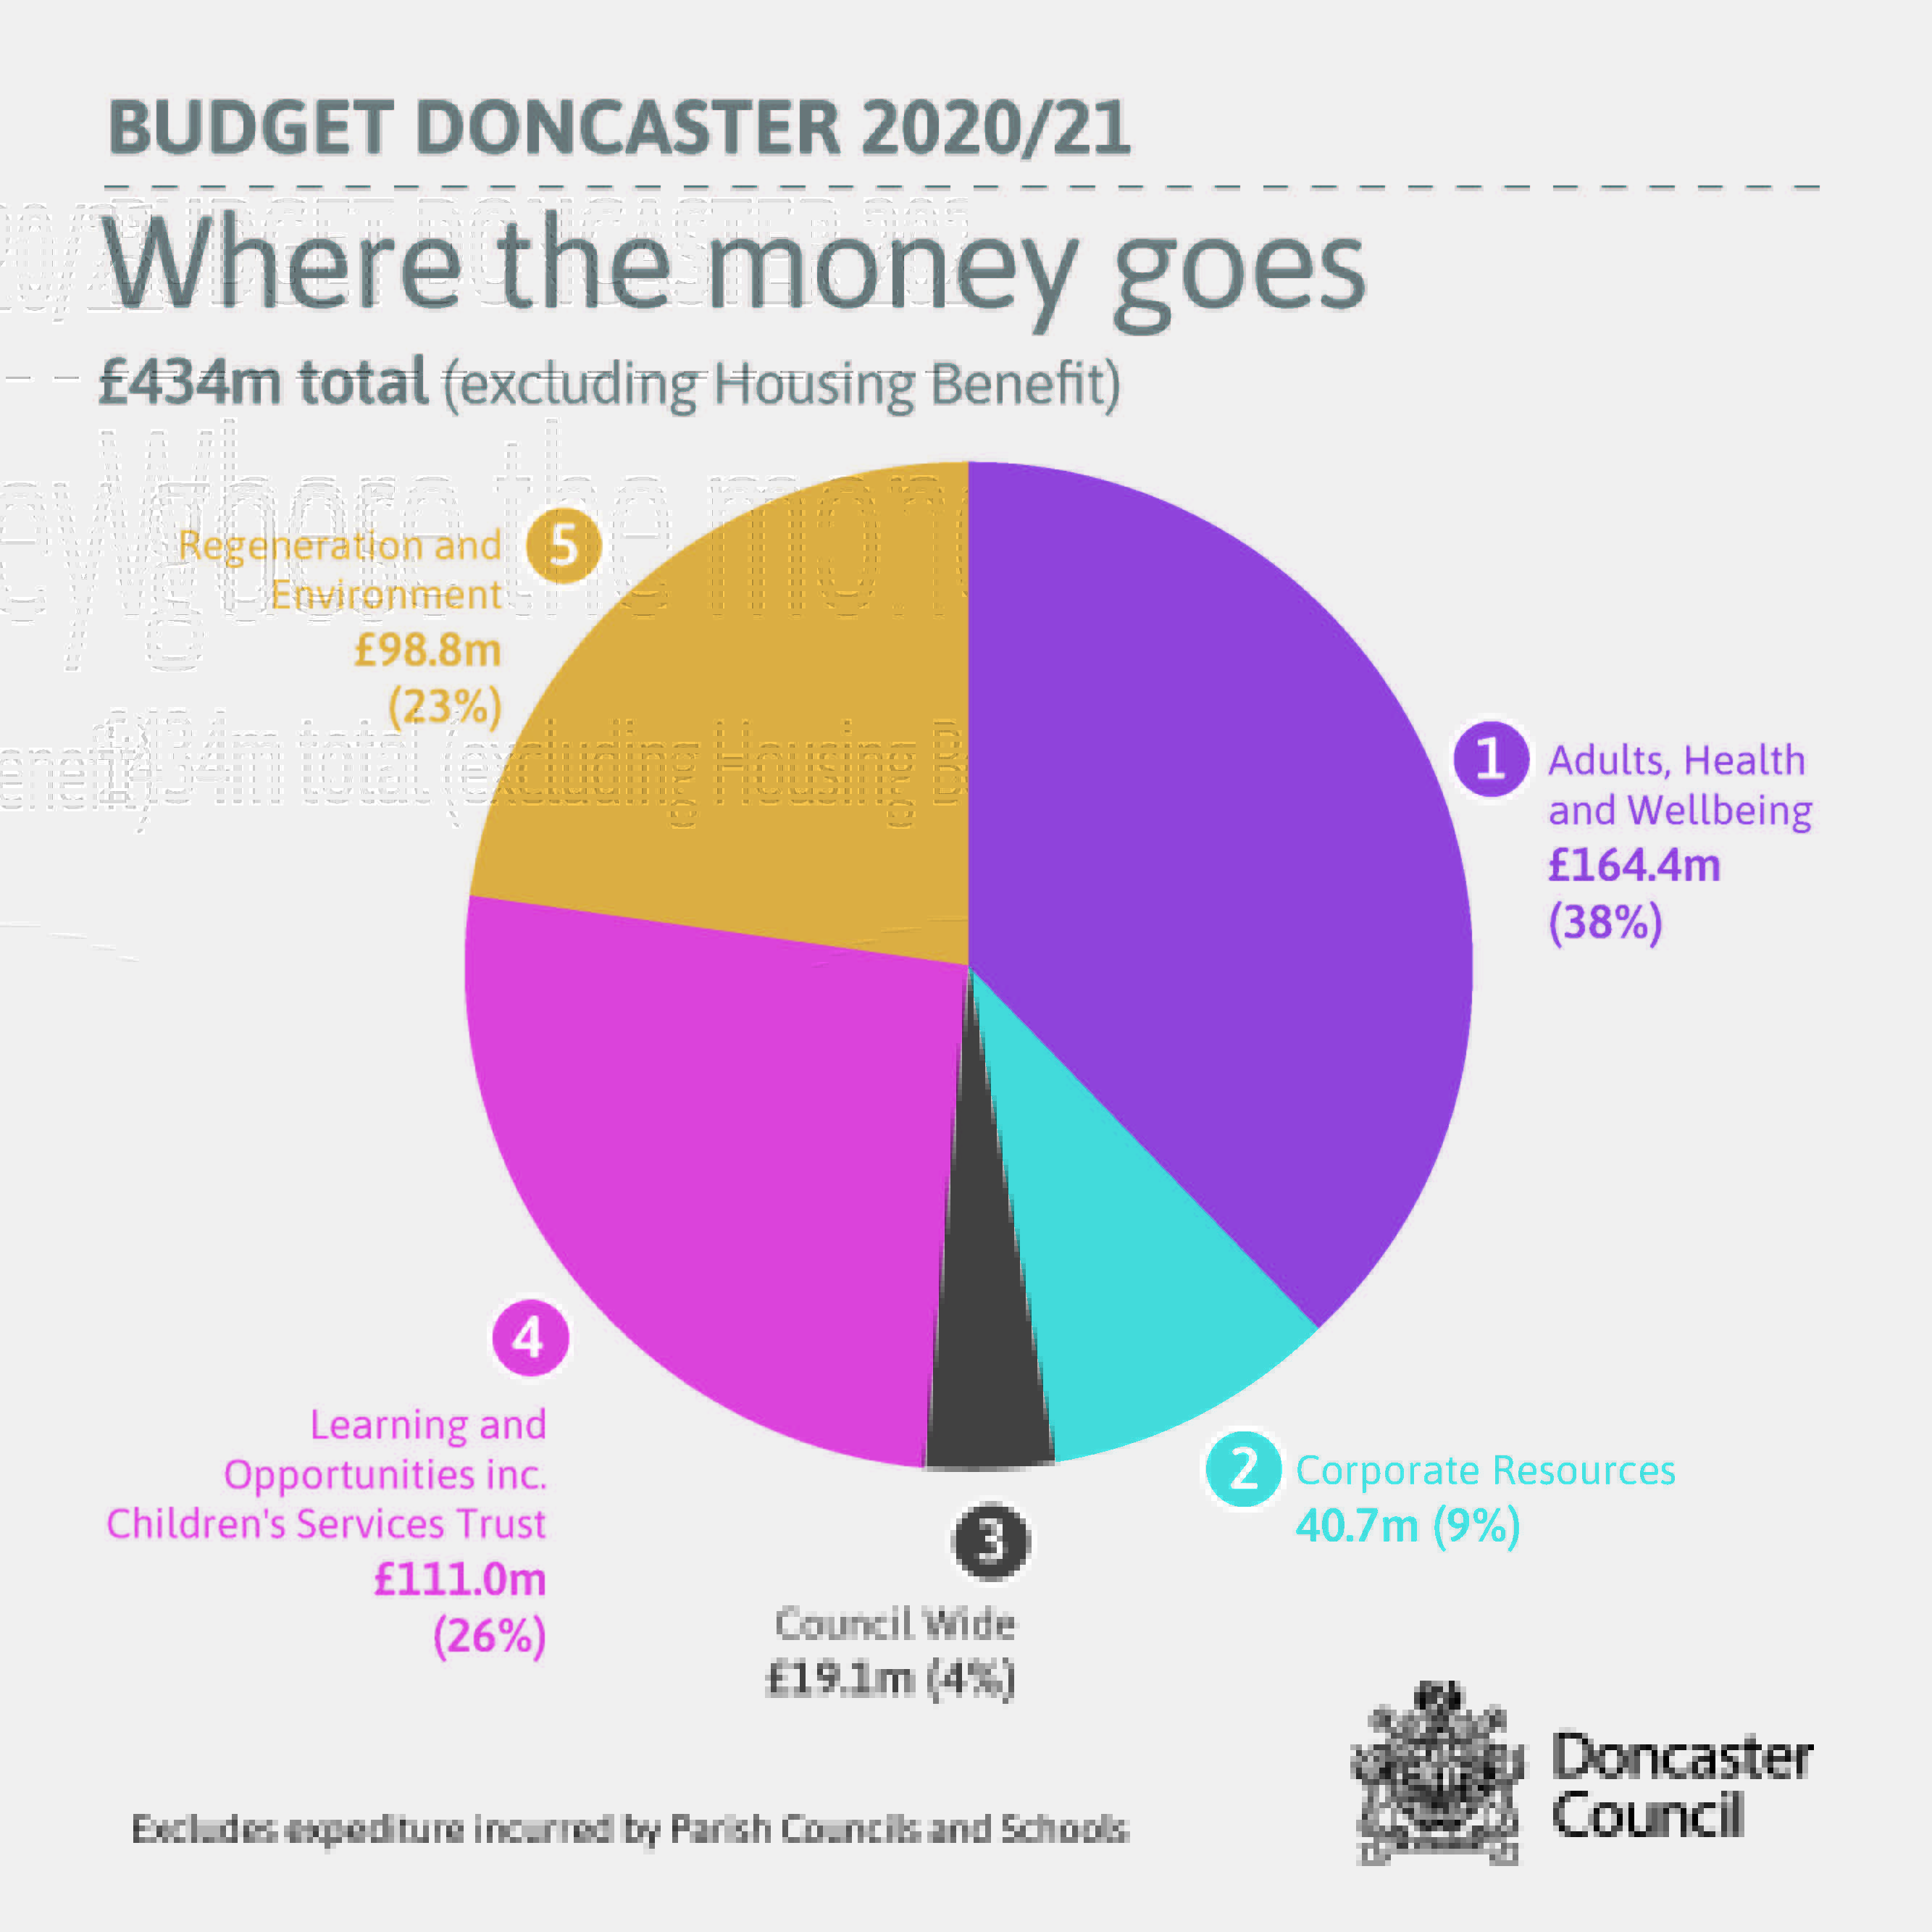 doncaster-council-on-twitter-finally-this-picture-highlights-where